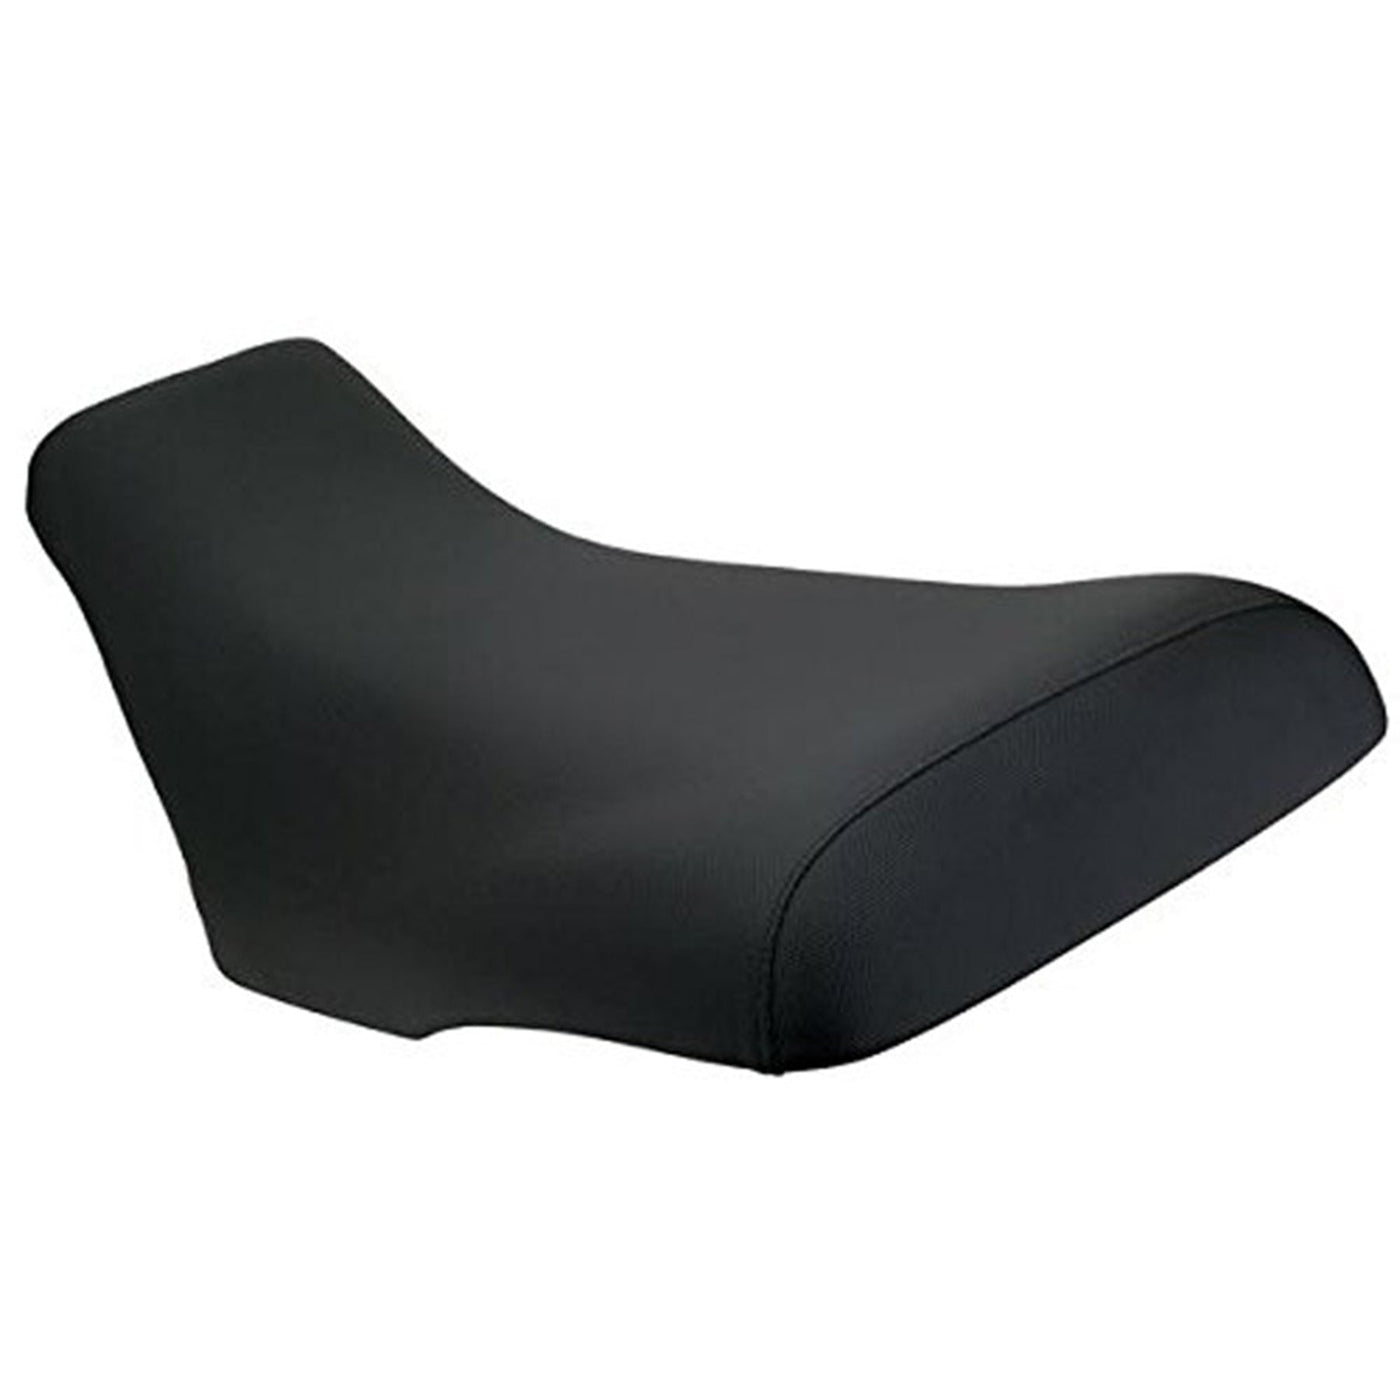 Pacific Power 31-34008-01 Gripper Seat Cover - Black #31-34008-01